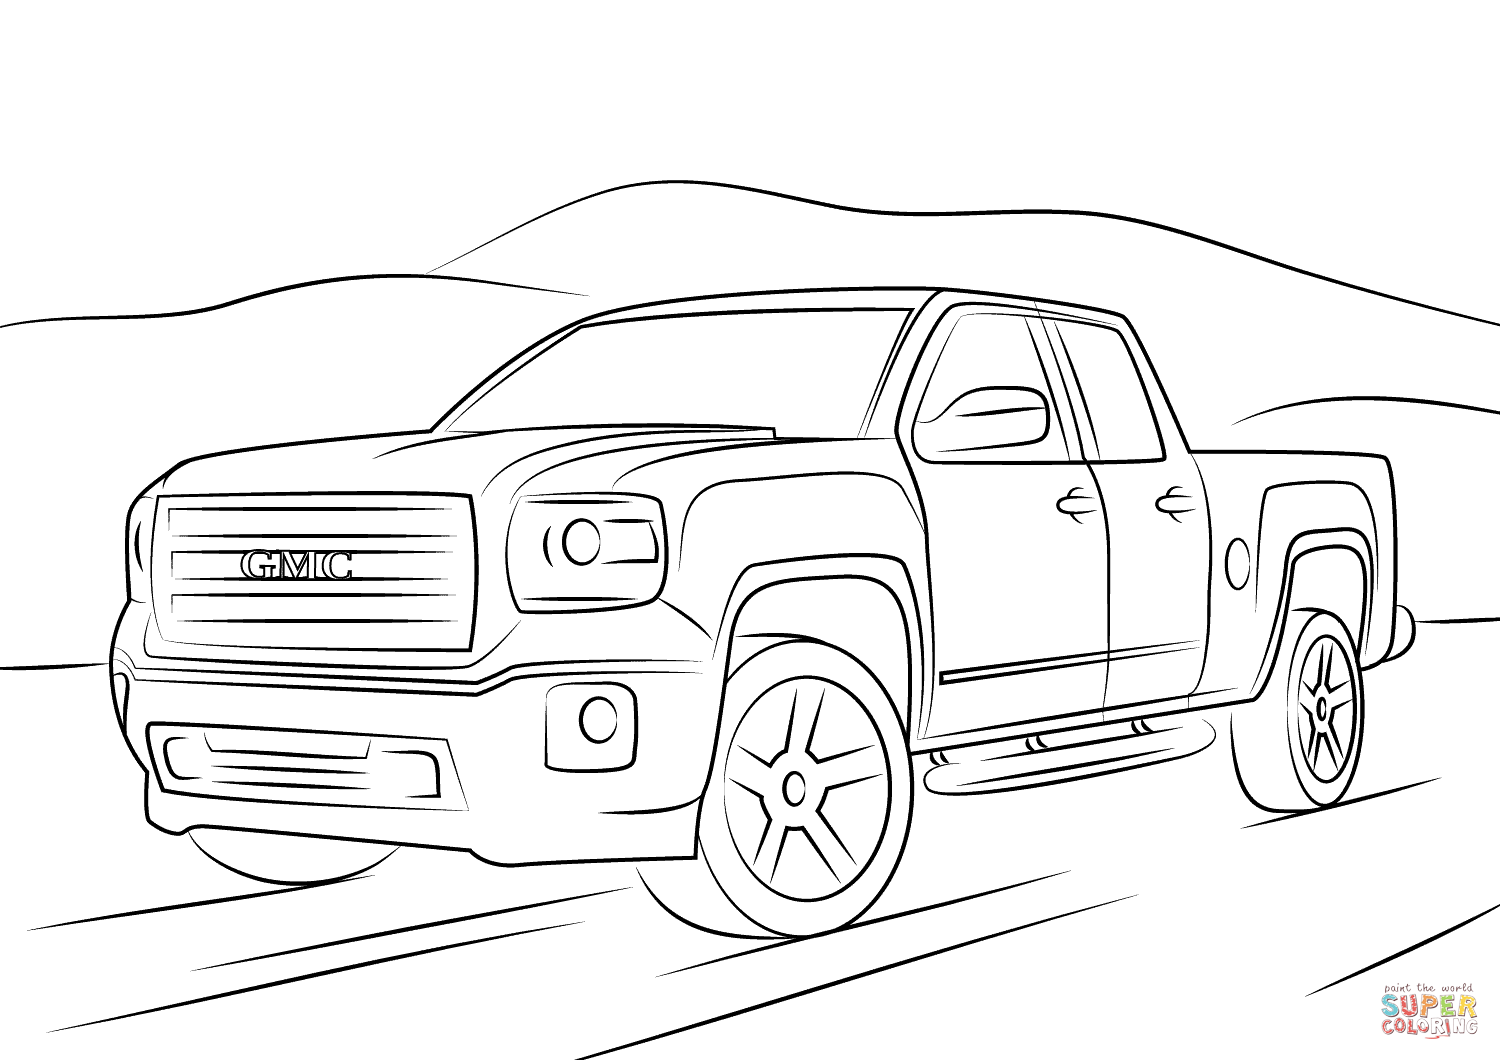 Gmc sierra coloring page free printable coloring pages